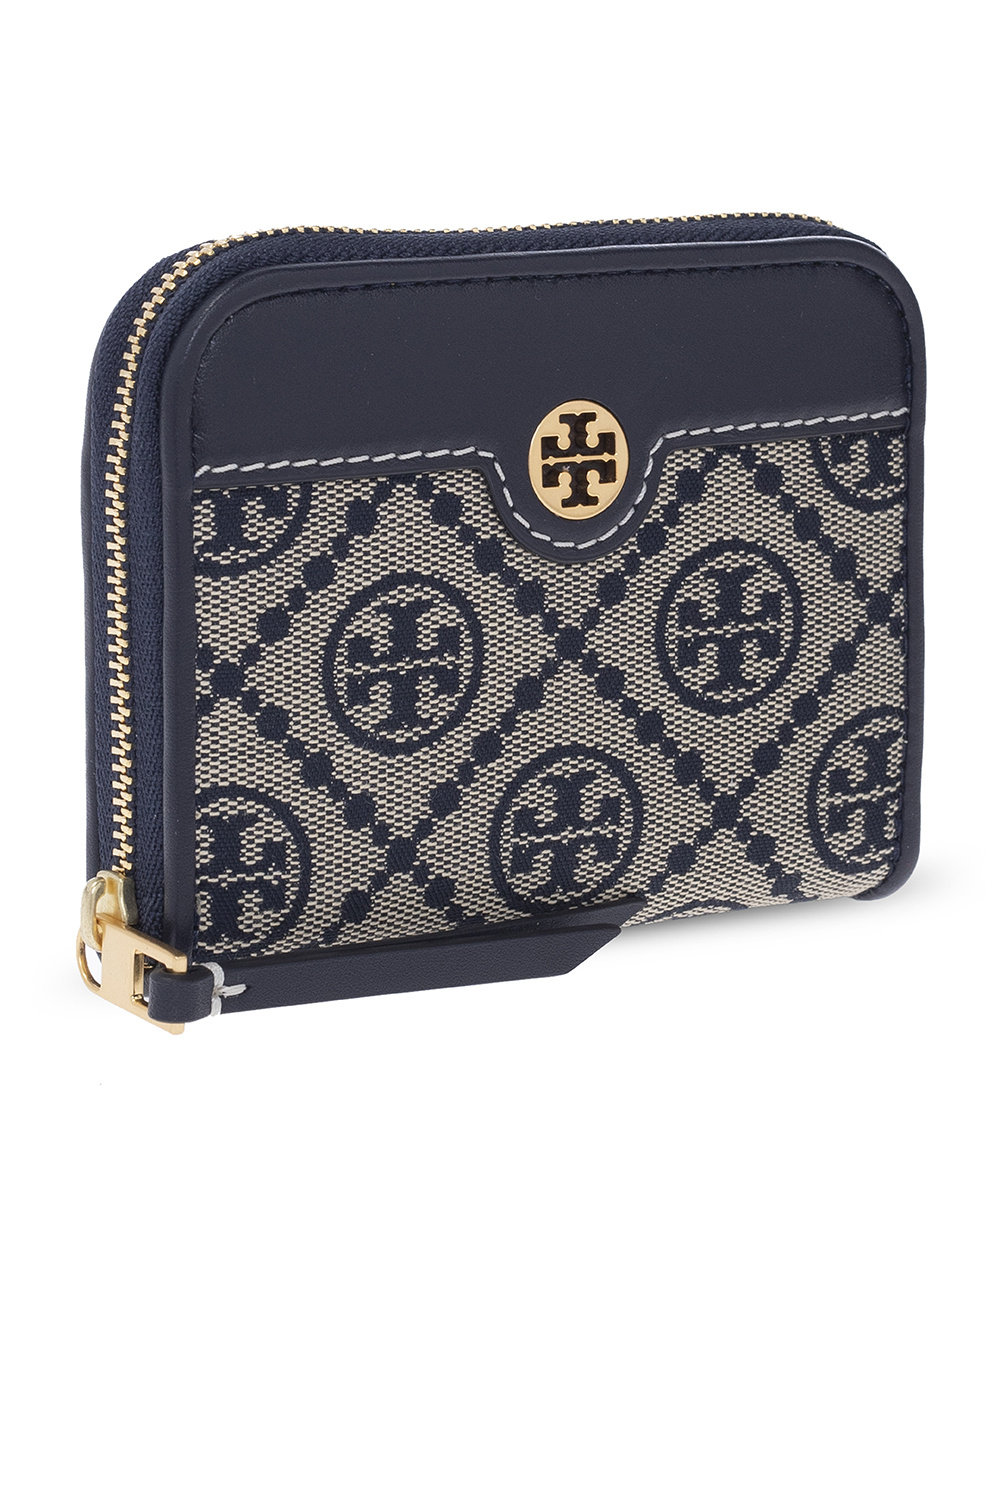 Check out the most fashionable models Tory Burch - IetpShops Norway